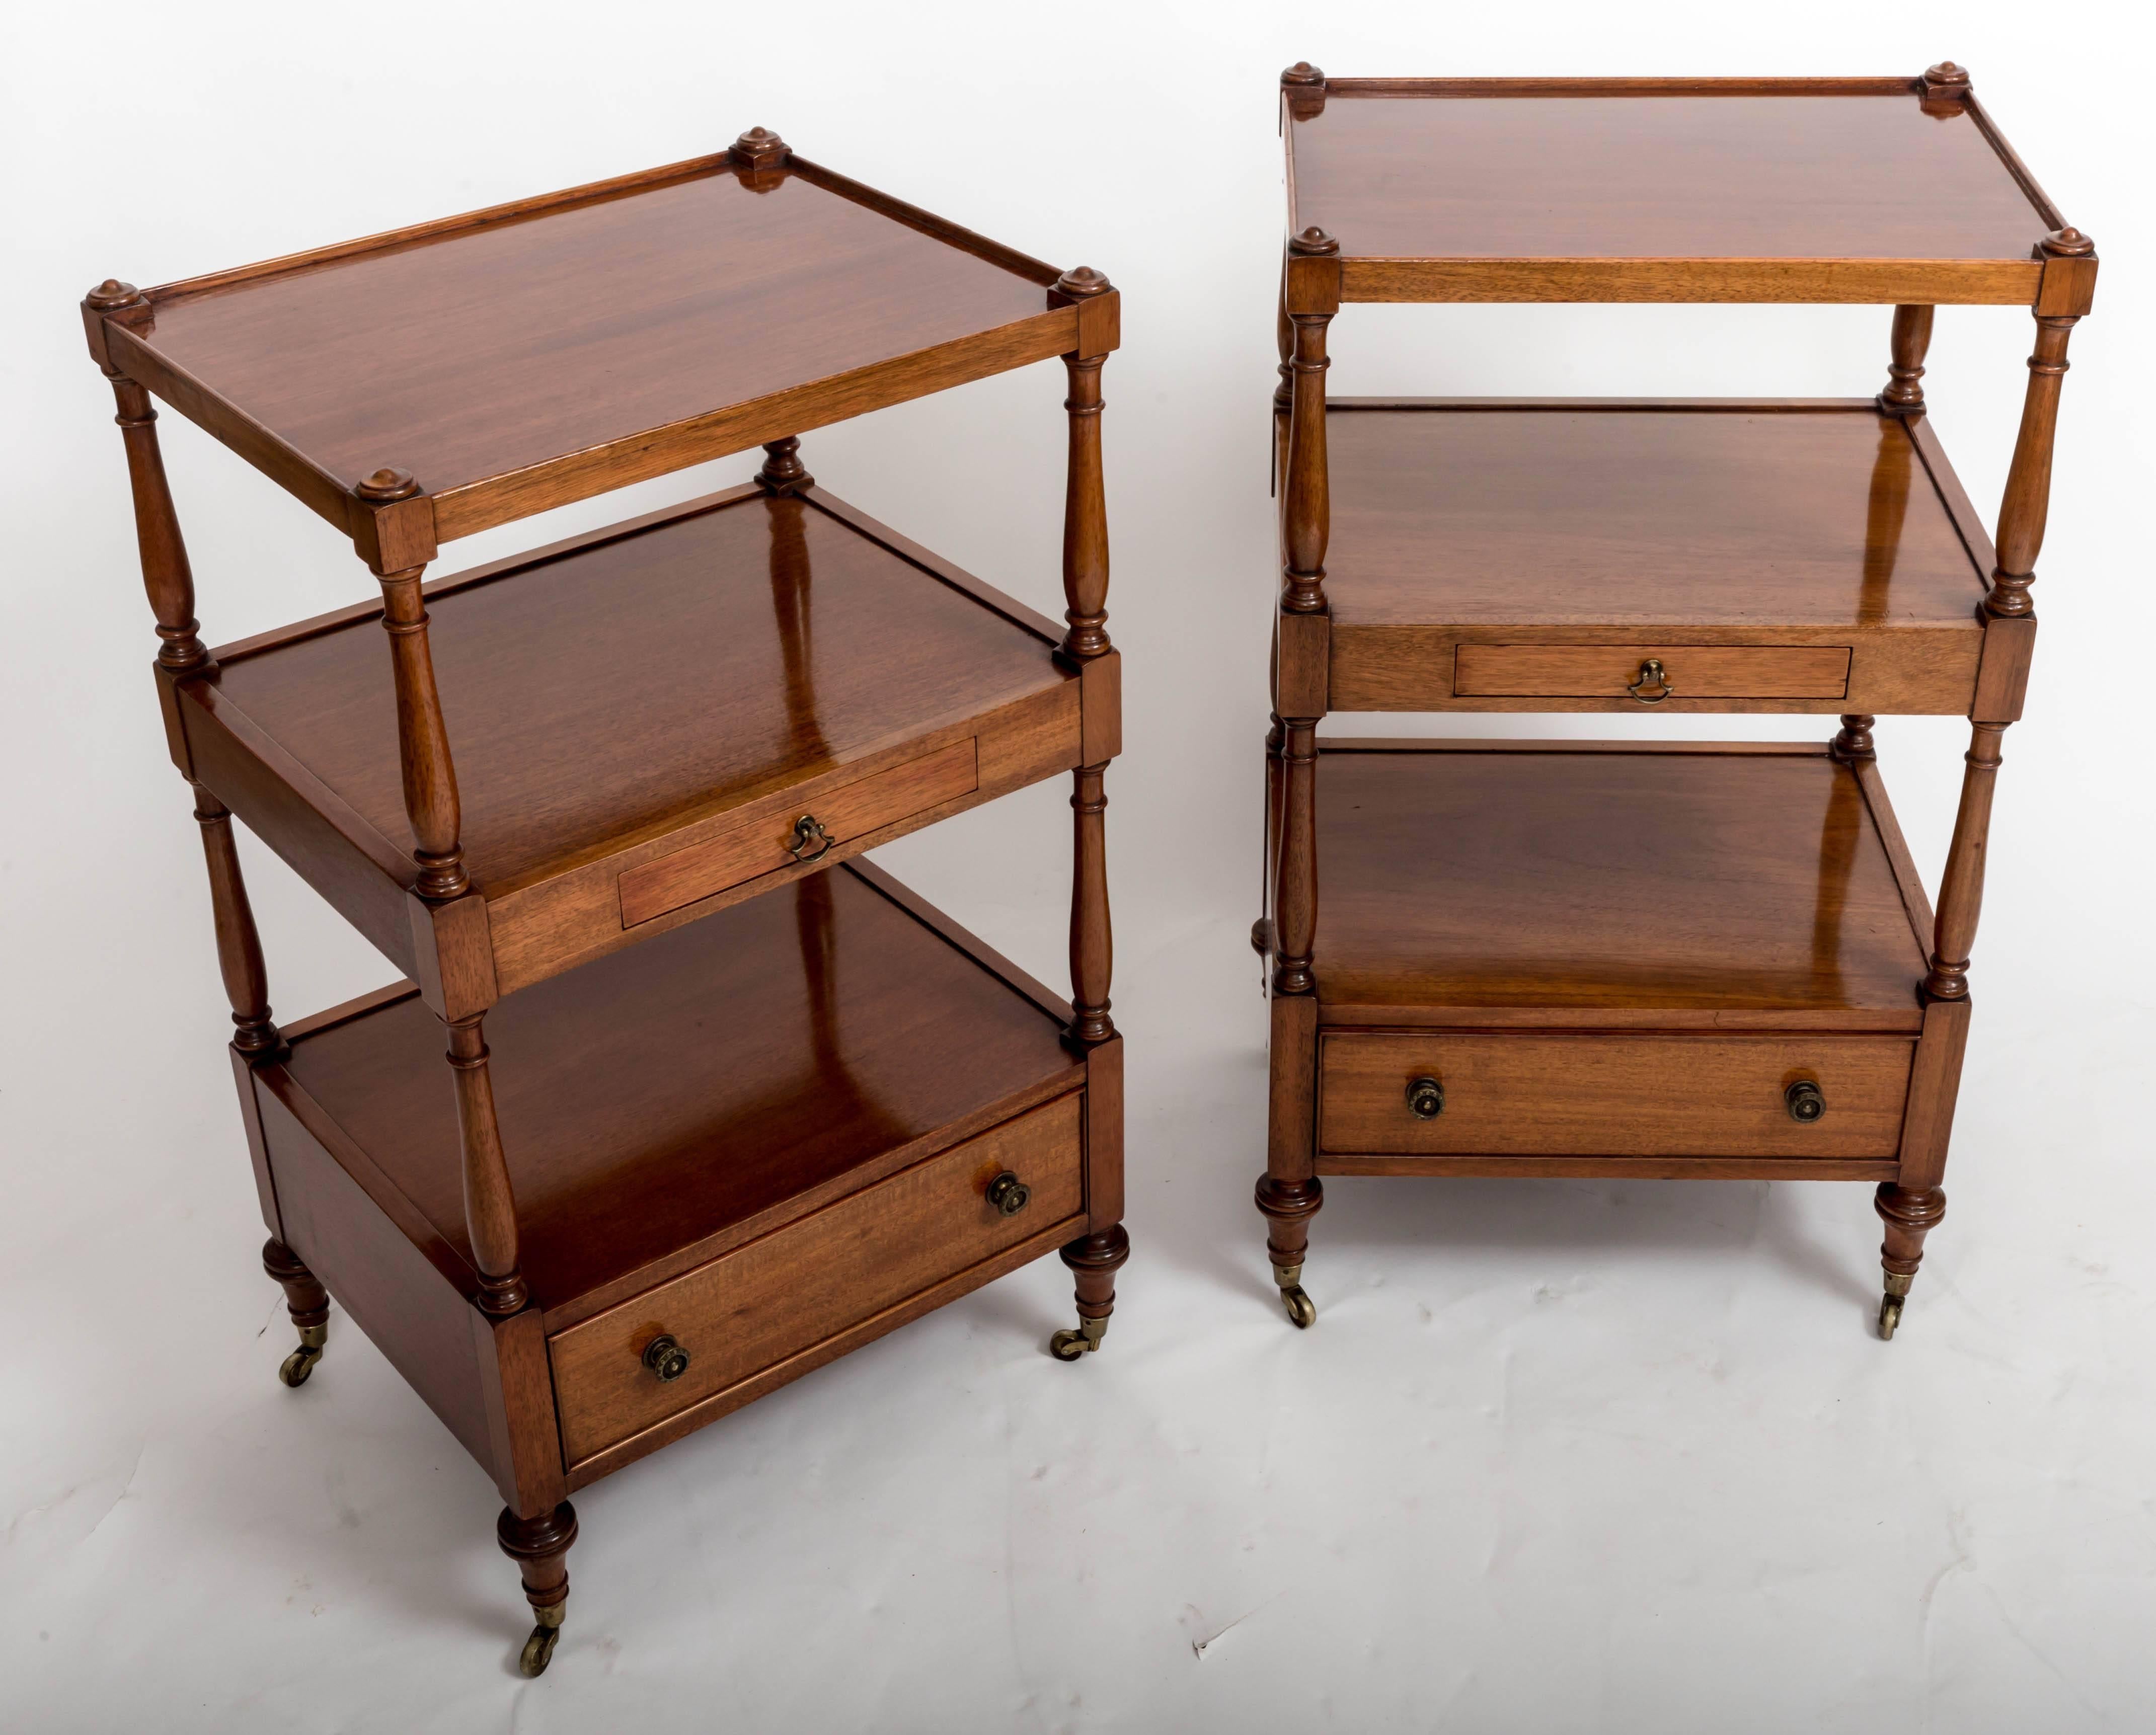 Very unique bedside etageres with two drawers in each, bottom drawers 3.5